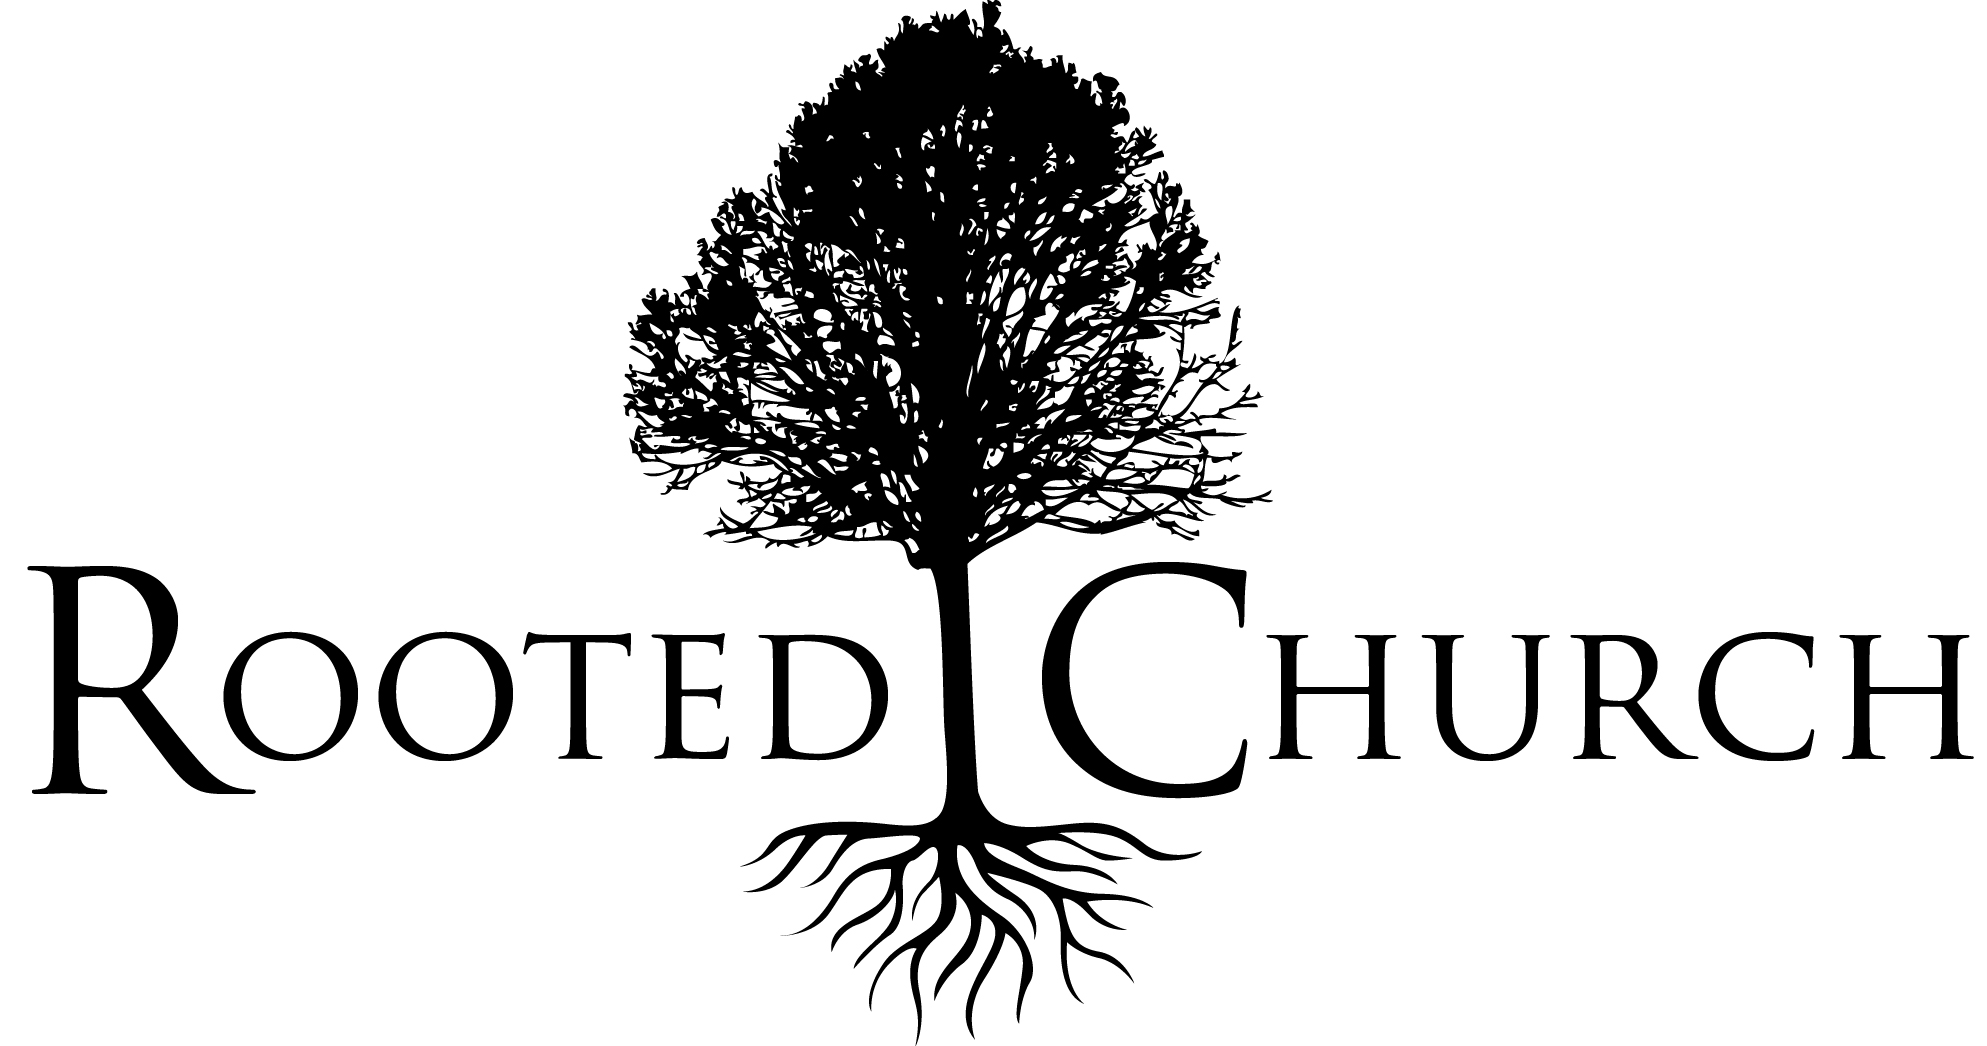 Rooted Church logo